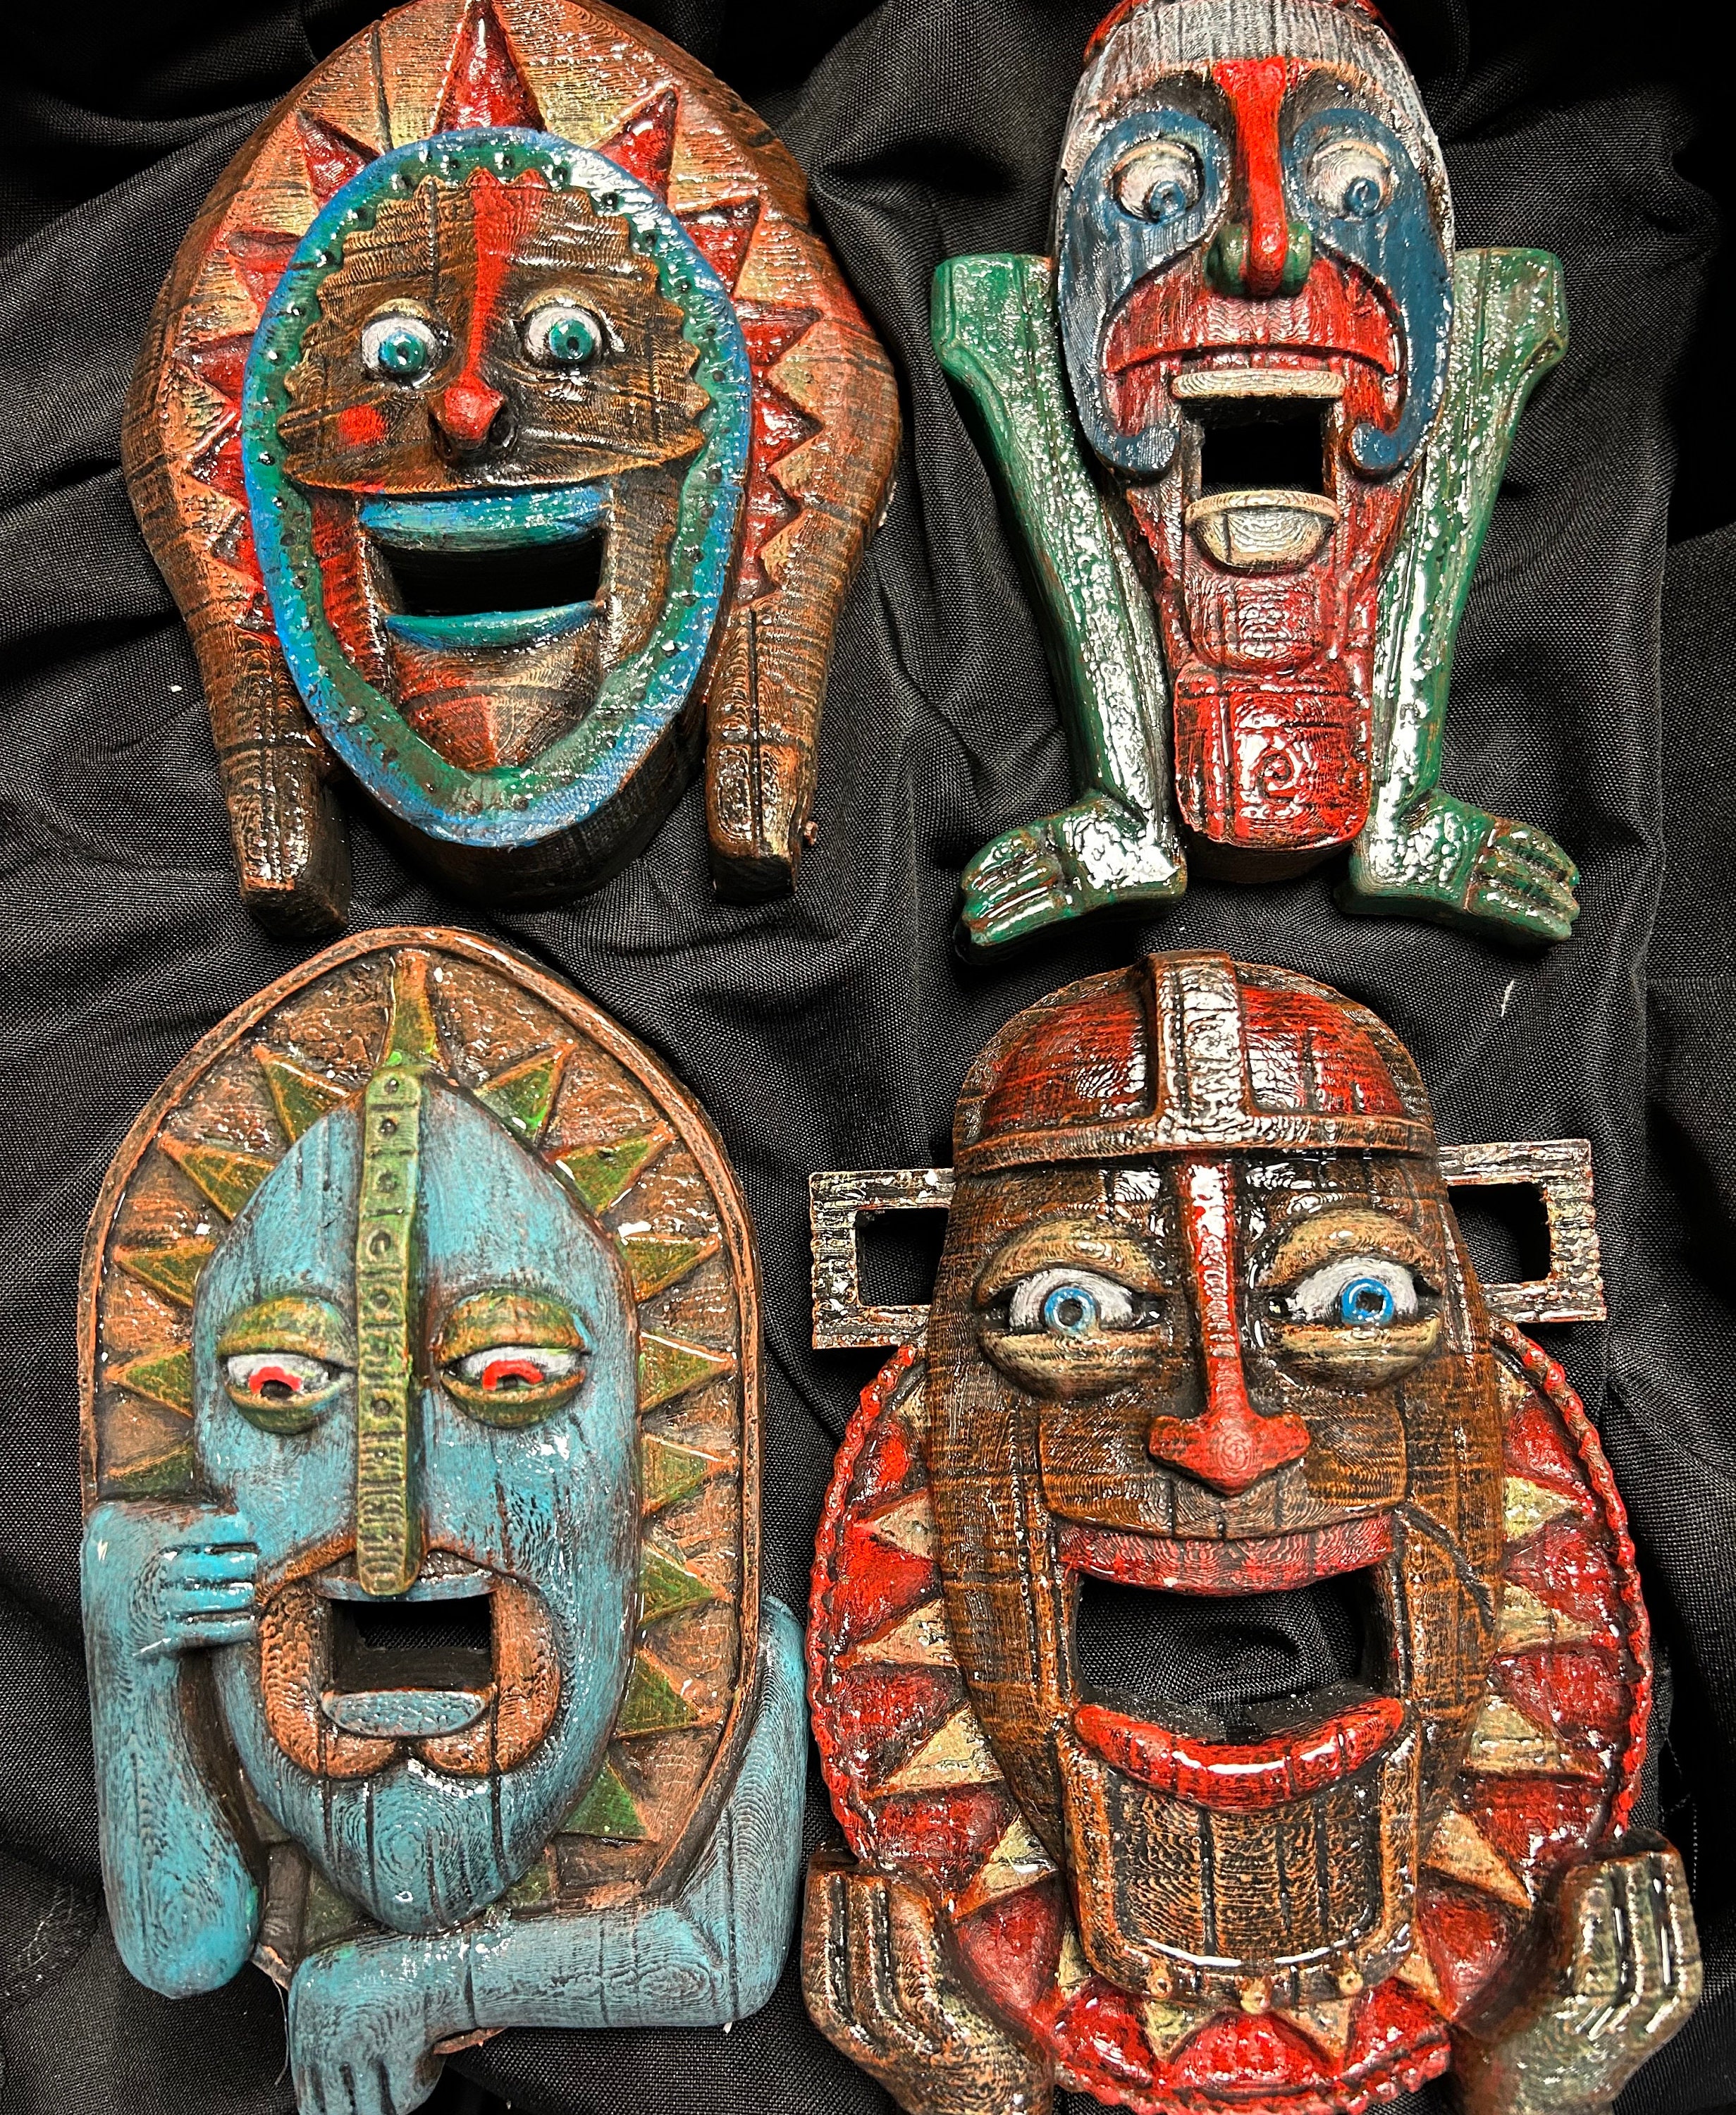 Udgående Somatisk celle forhold Tiki Mask With Face Inspired by Disney Enchanted Tiki Room and - Etsy